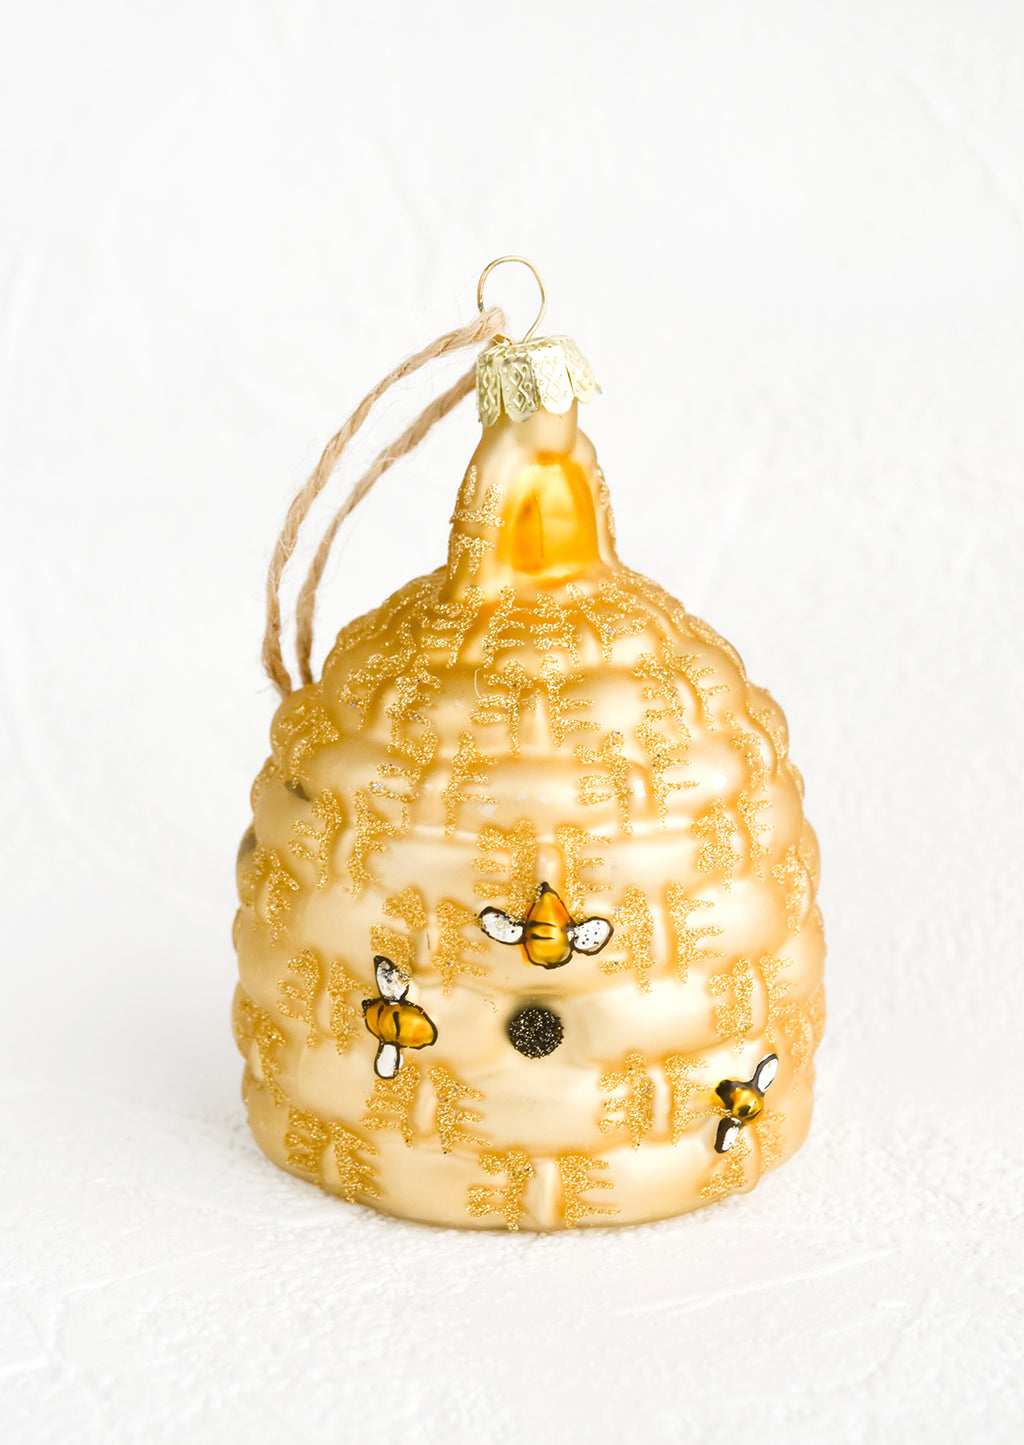 2: A glass ornament in the shape of a beehive with painted on bees.